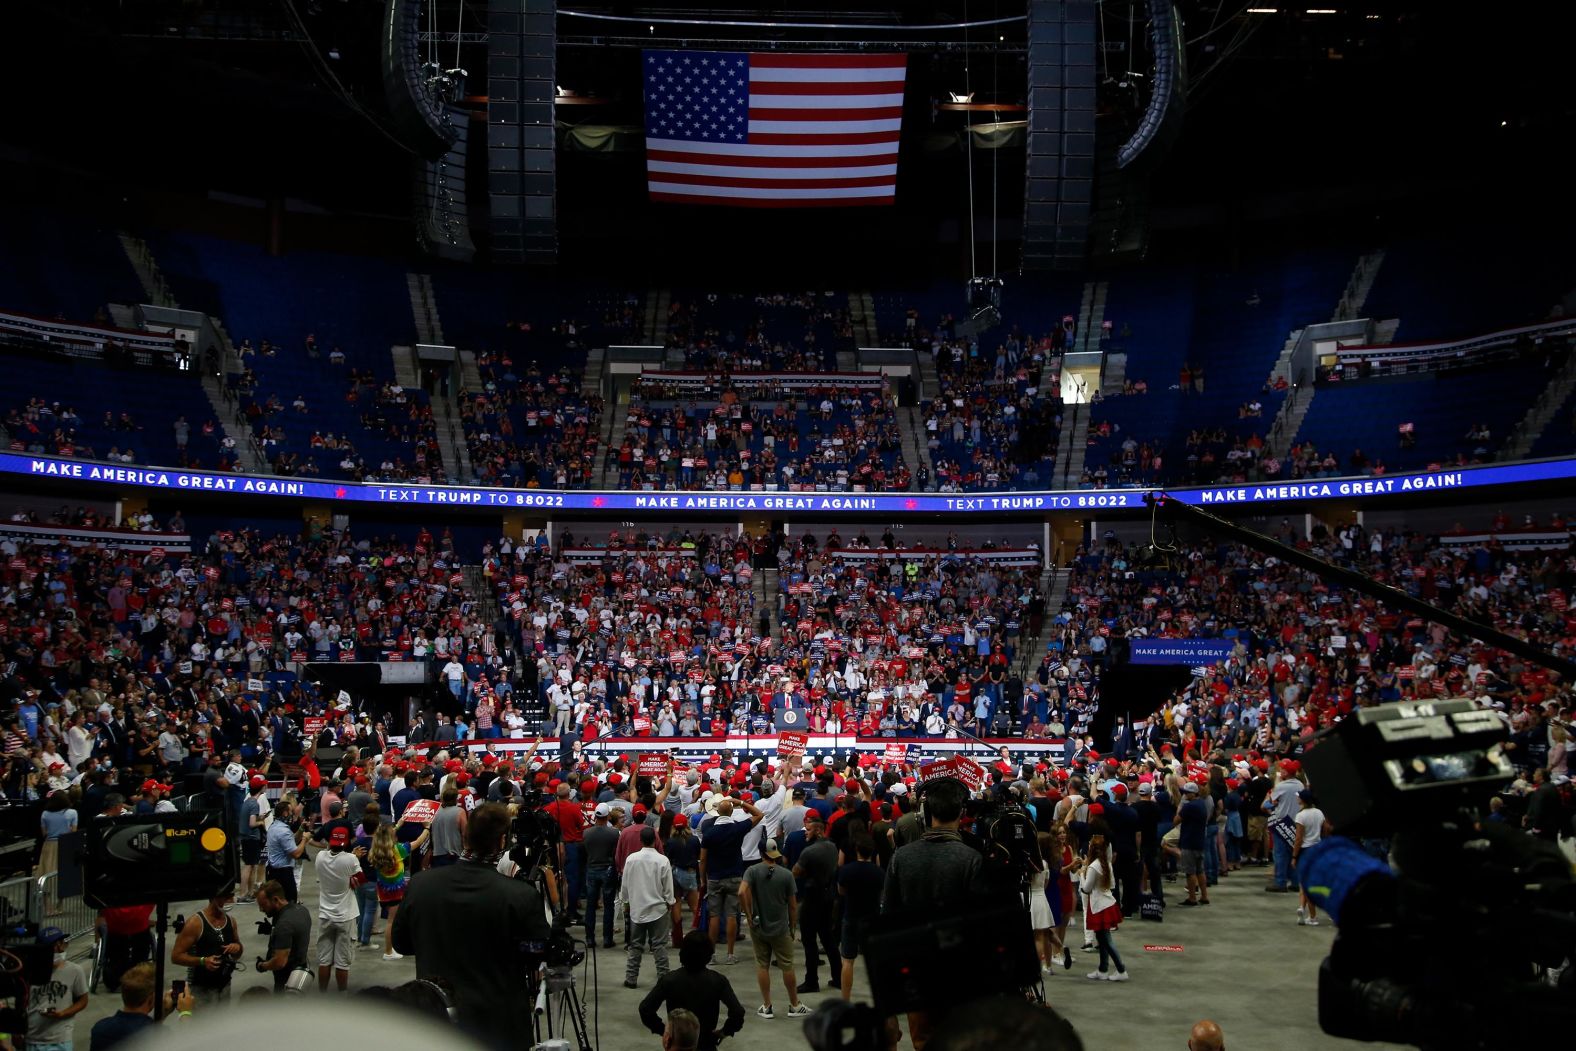 The crowd was <a href="index.php?page=&url=https%3A%2F%2Fwww.cnn.com%2F2020%2F06%2F20%2Fpolitics%2Ftulsa-rally-trump%2Findex.html" target="_blank">smaller than expected.</a> In the days leading up to Trump's rally, he and his allies ginned up expectations for a massive crowd with campaign officials telling CNN that more than a million people had registered to attend. One local official said they expected 100,000 to show up near the arena.